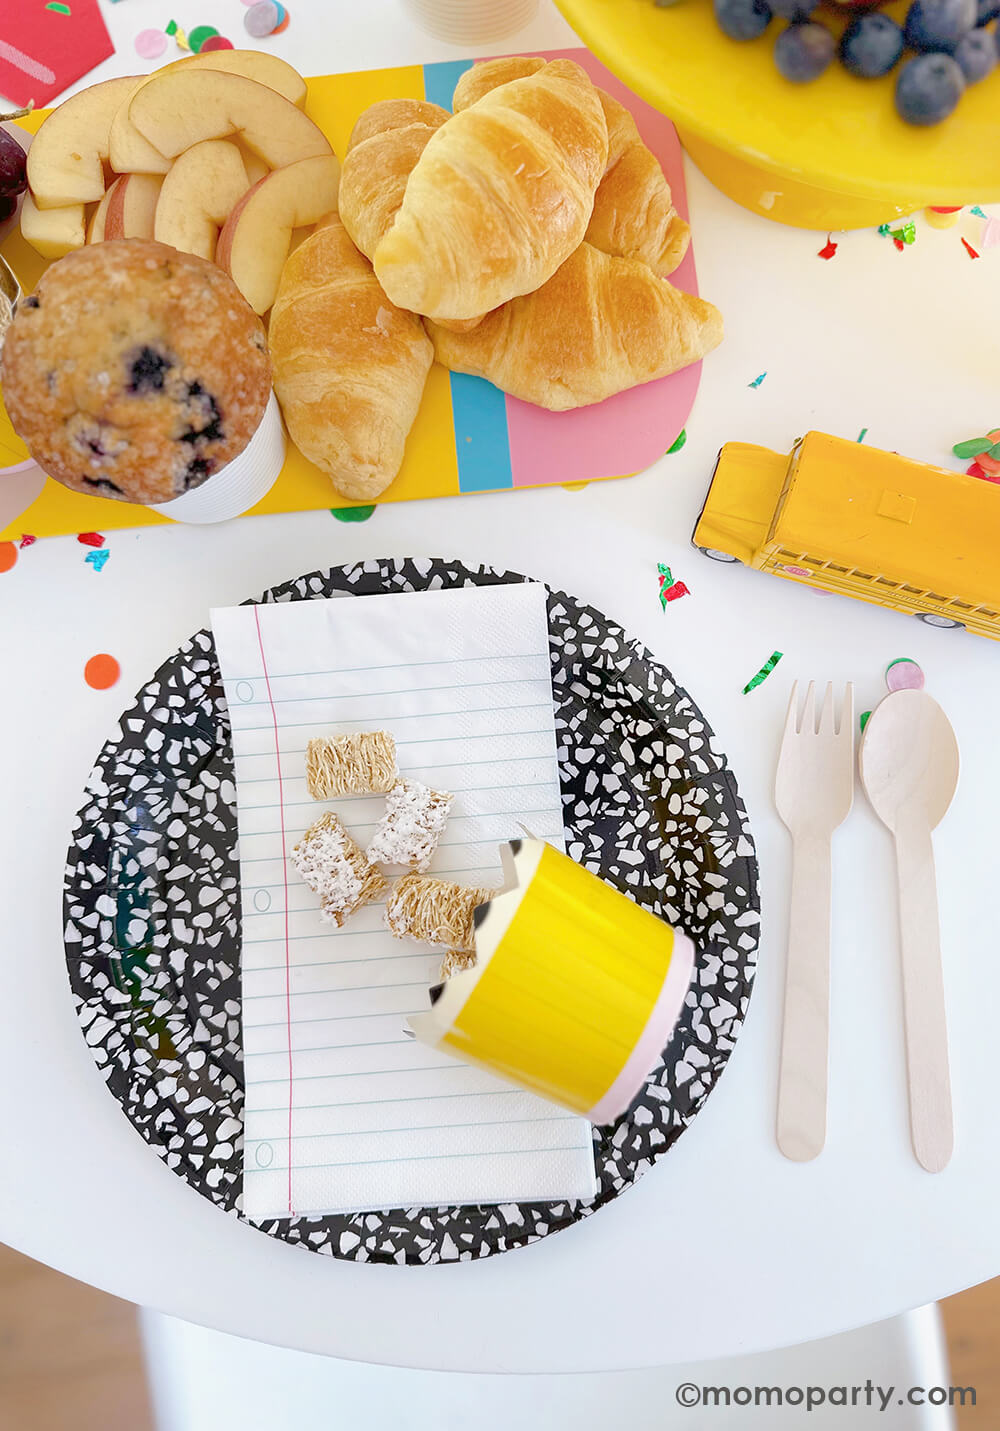 A kid's first day of school celebration party table by Momo Party featuring school themed tableware including art book inspired round plates, notebook napkins and pencil shaped food cups. In the middle, a pencil shaped charcuterie board filled with delicious breakfast items including mini croissants, apple slices, muffles and fruits - a great and healthy back to school breakfast items for moms and can be easily recreated at home.